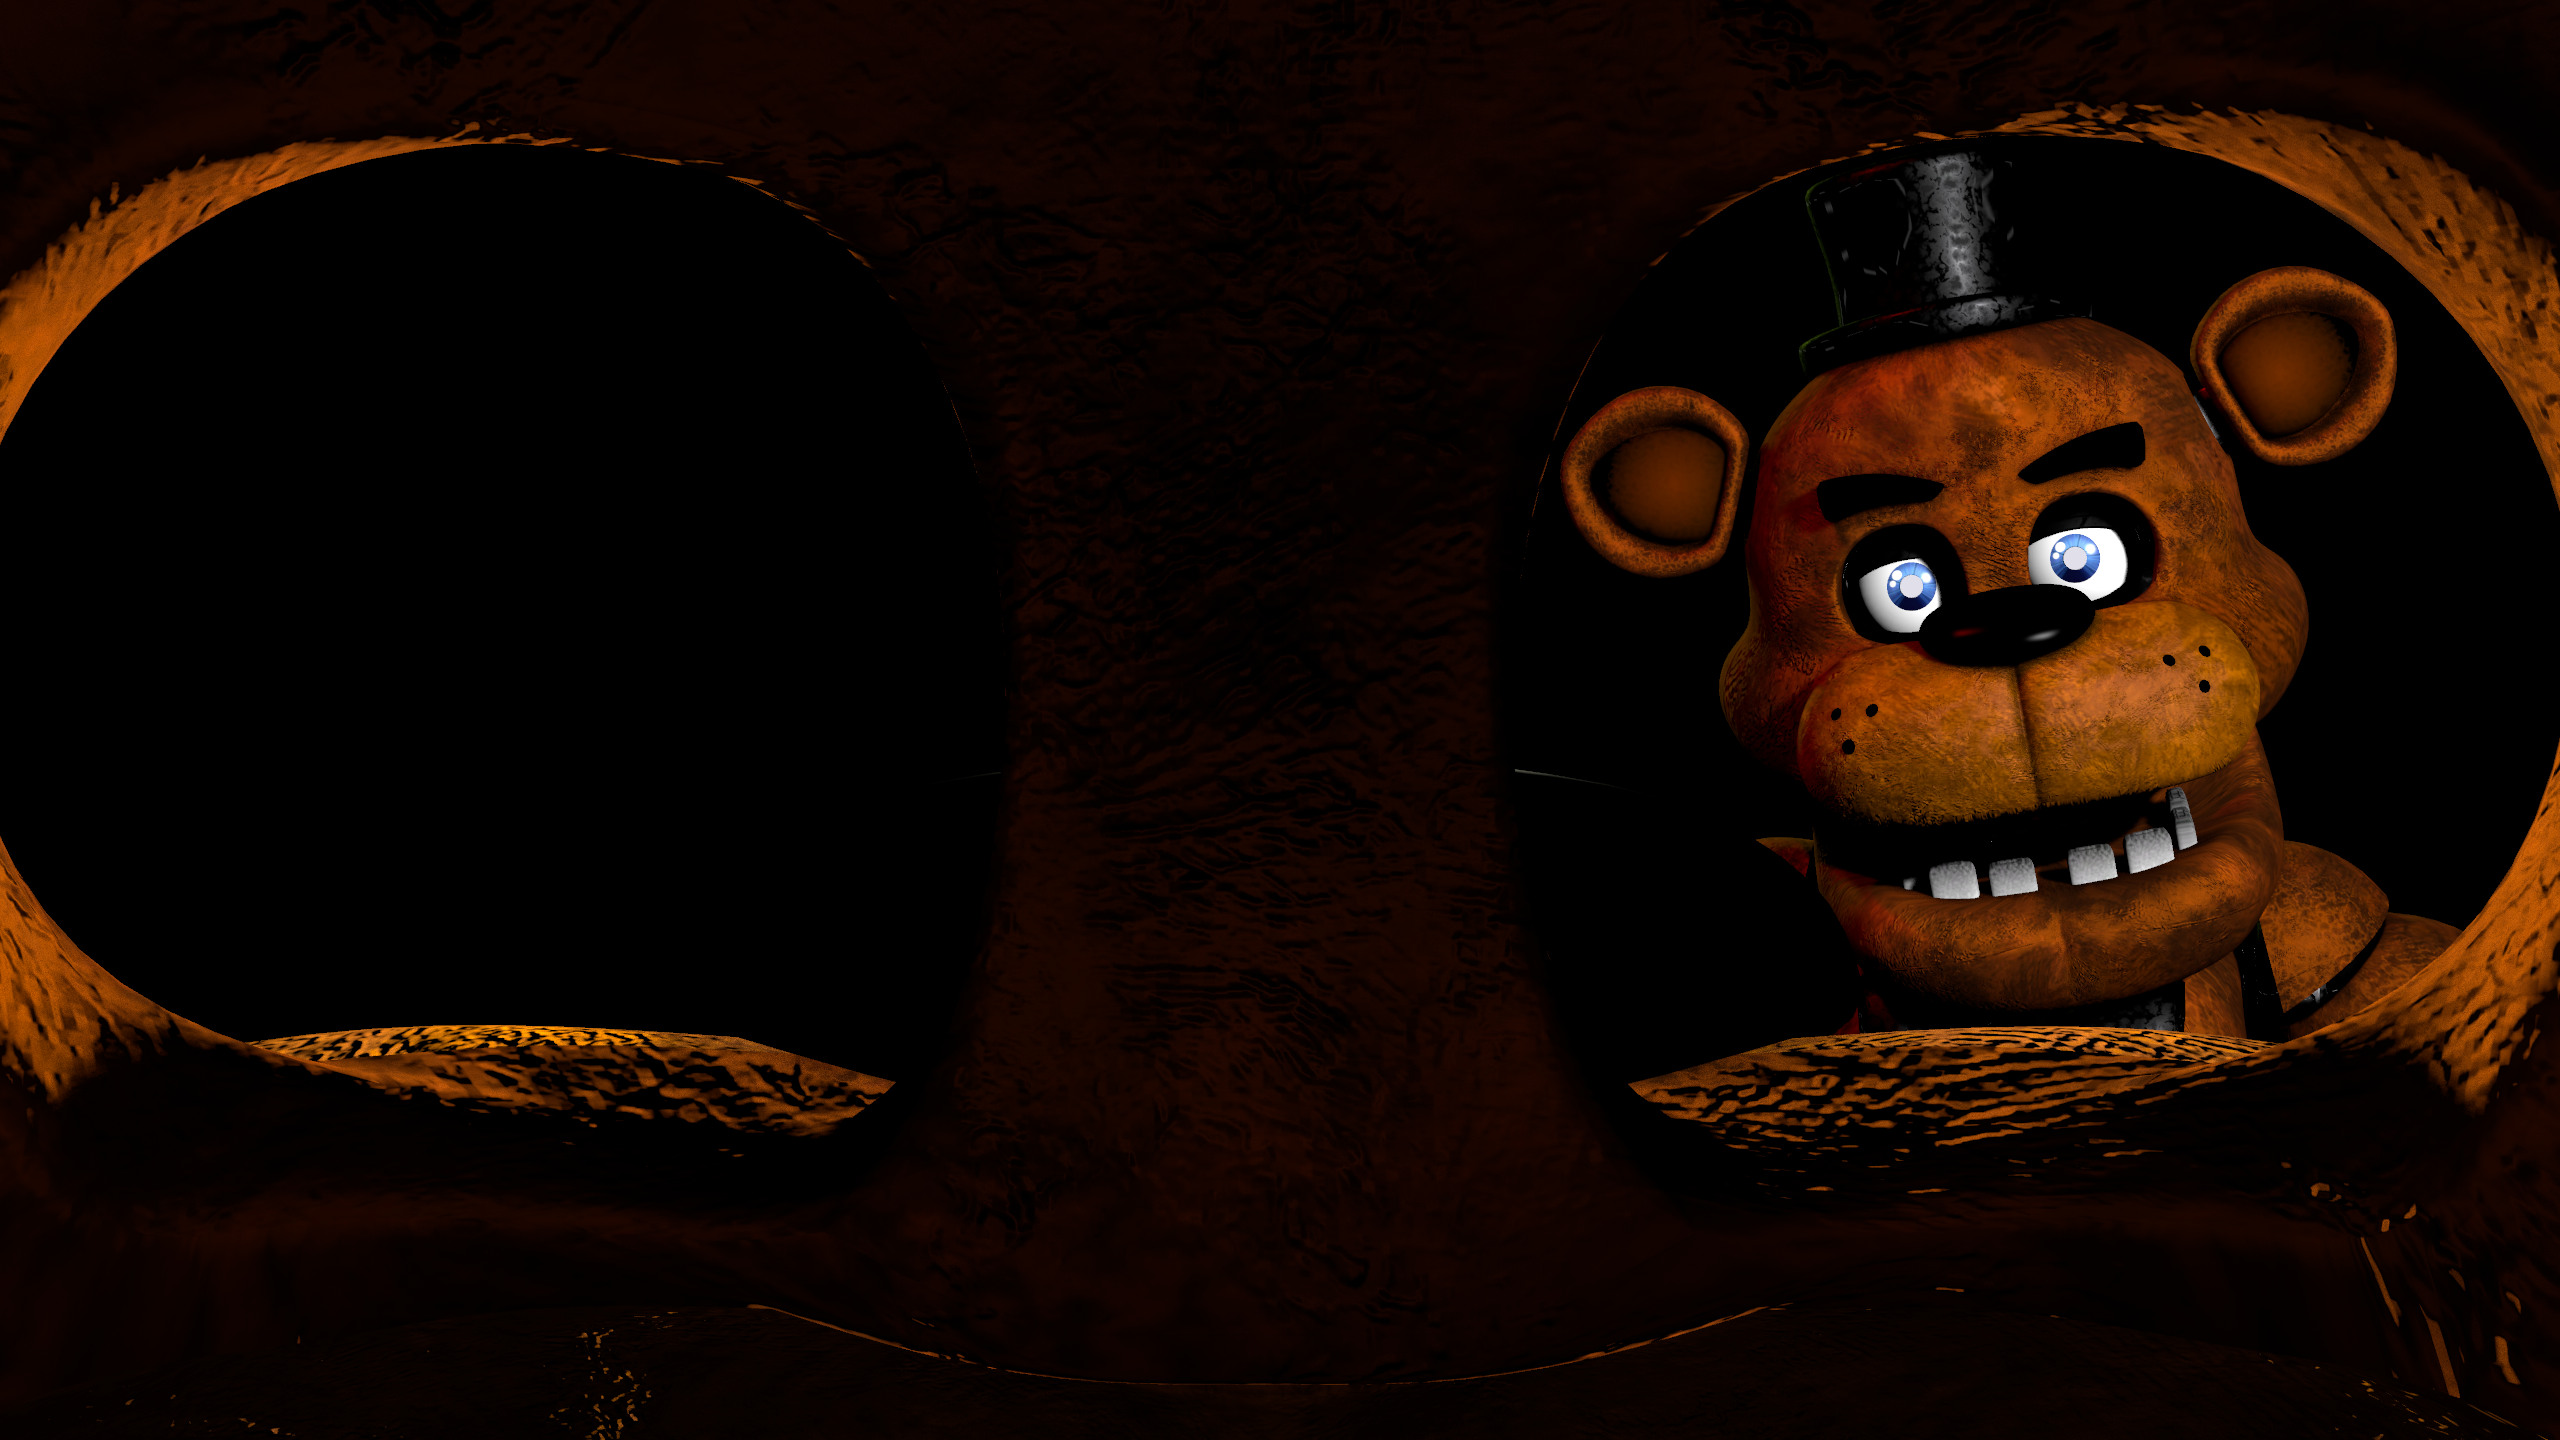 Attepmted A FNAF 2 Style Game Over Screen, Except It's FNAF 1